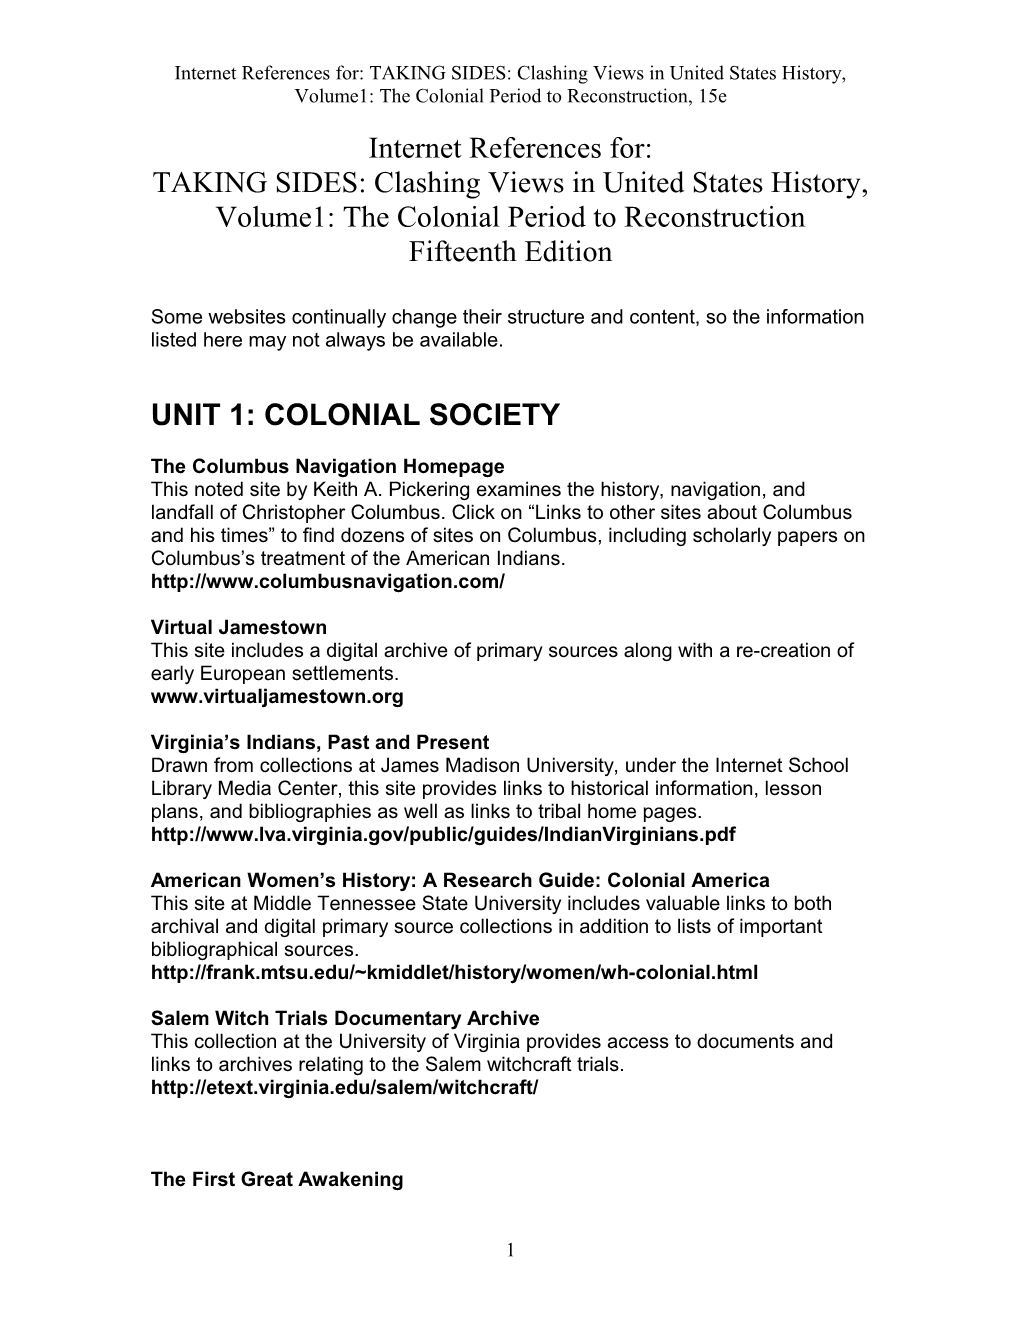 Internet References For:TAKING SIDES: Clashing Views in United States History, Volume1